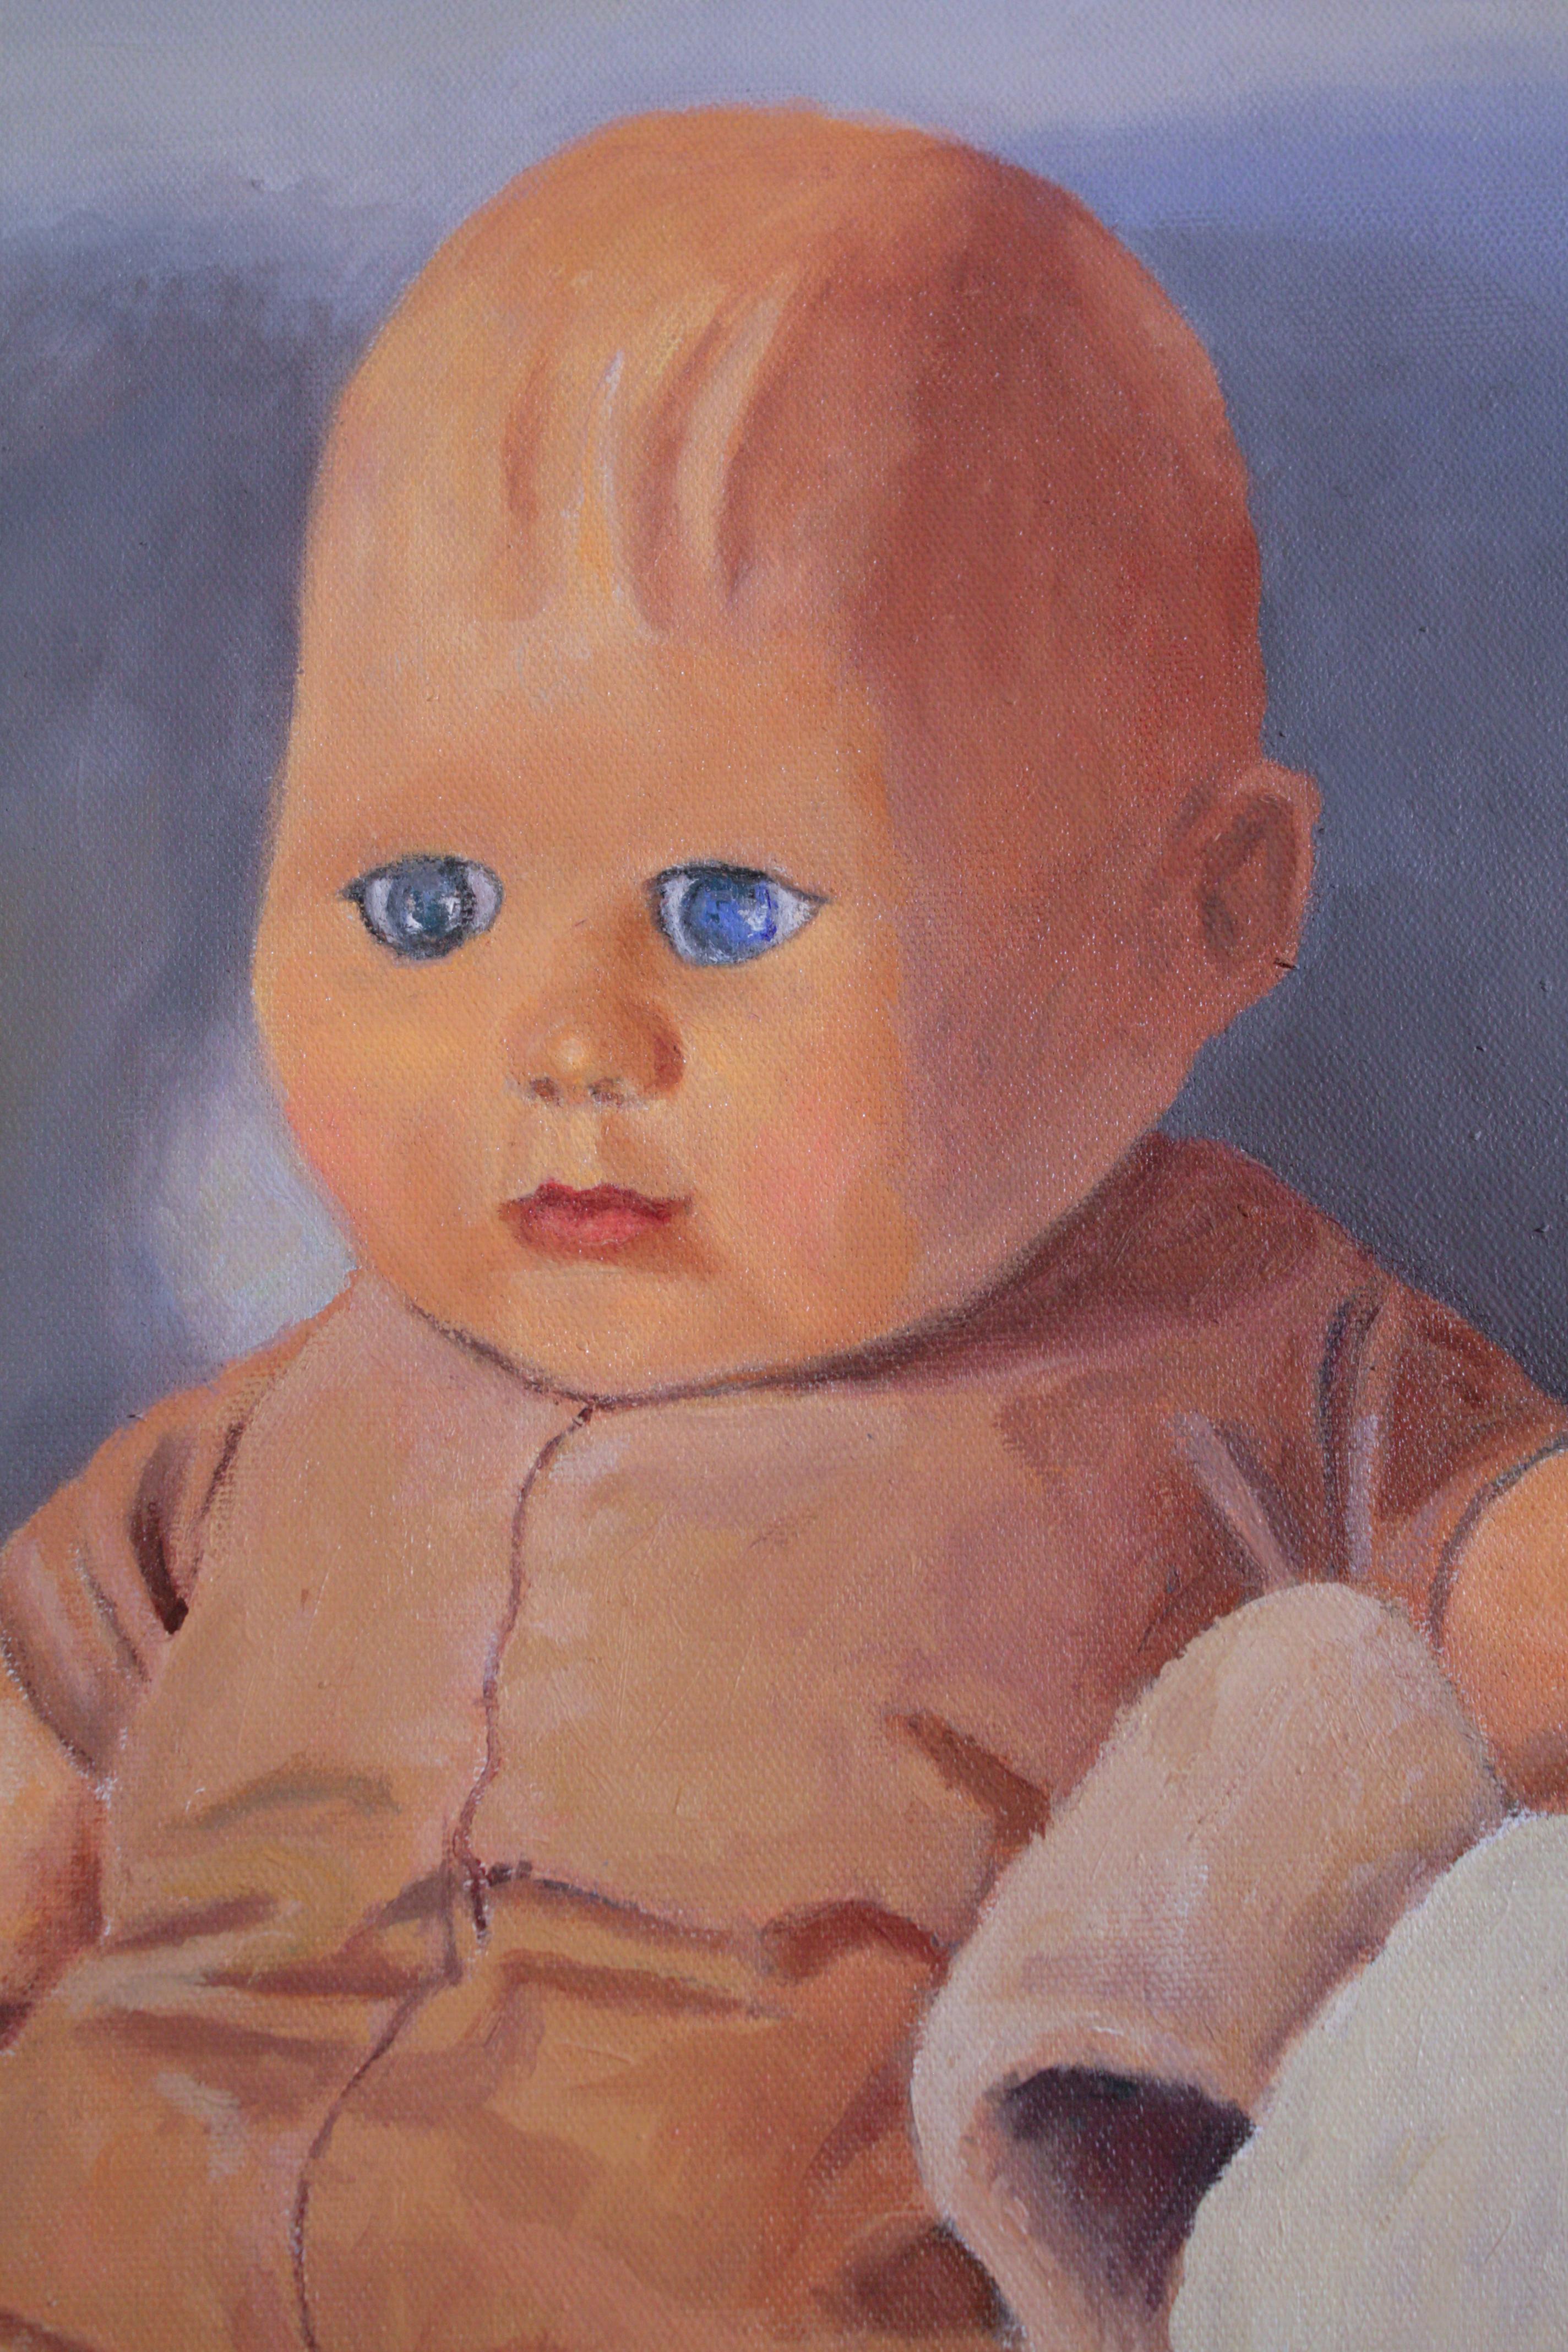 Doll with Pals, childhood toys, realistic oil painting - Painting by Douglas Newton